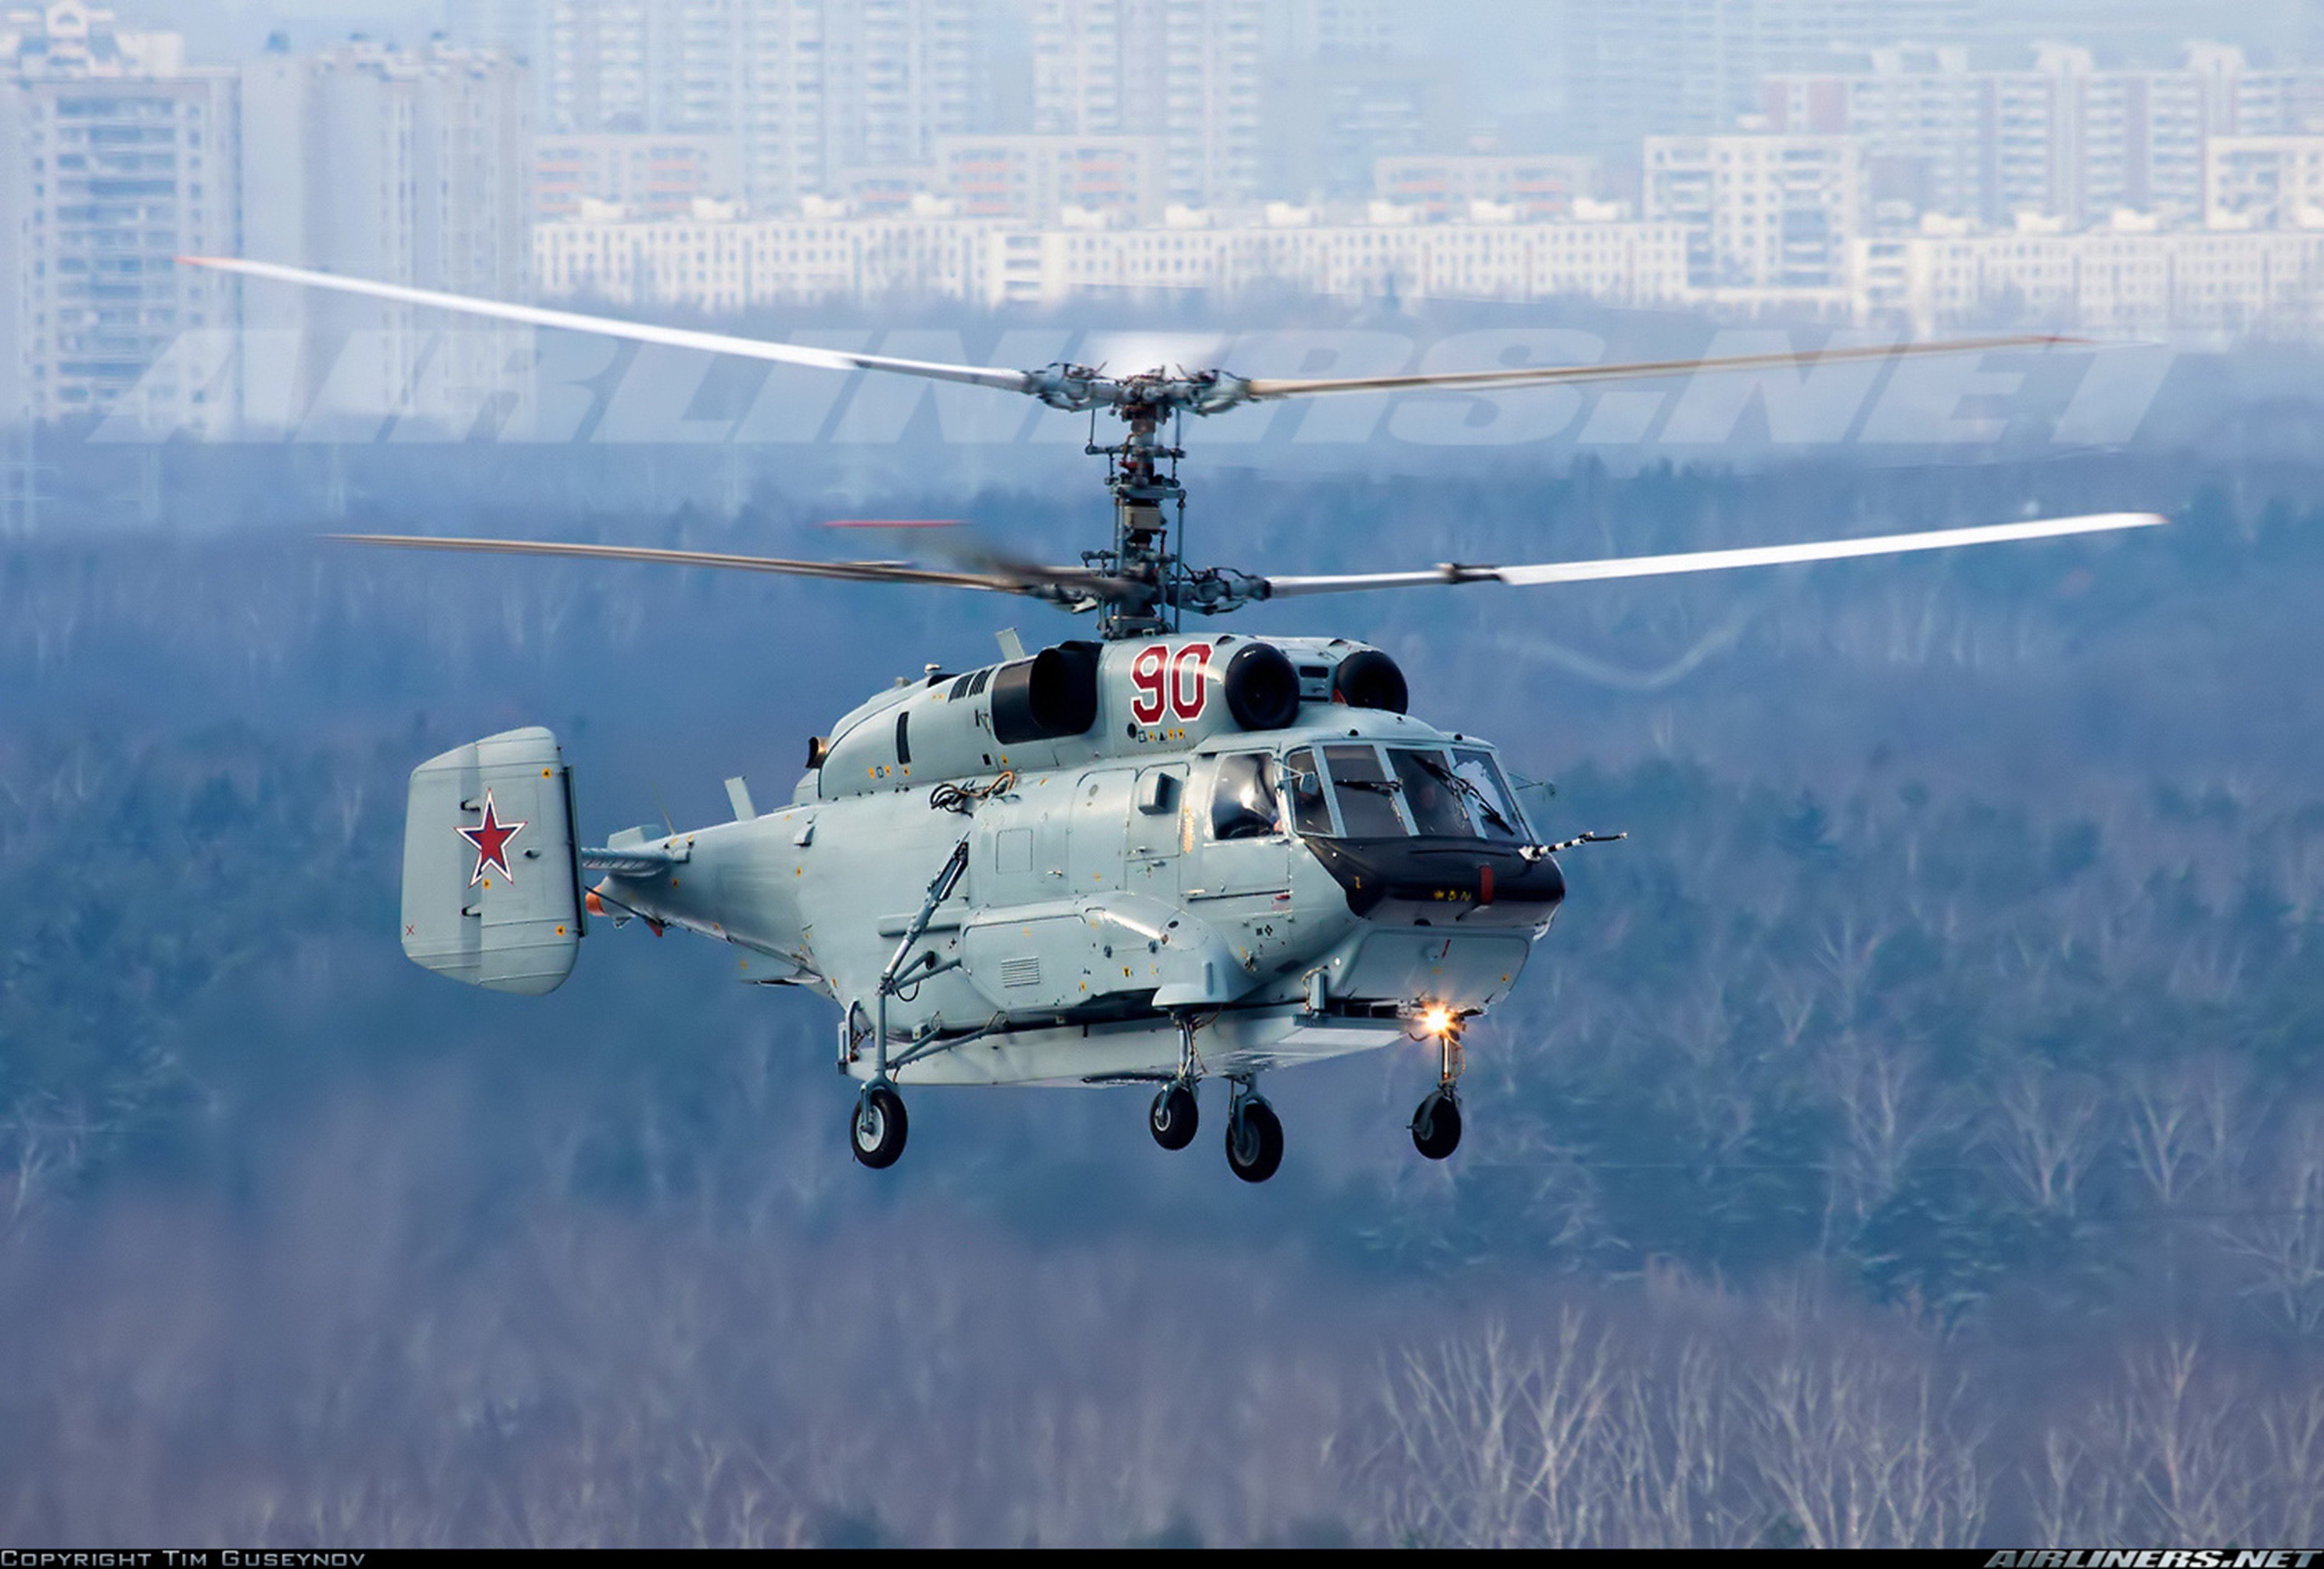 russian, Red, Star, Russia, Helicopter, Aircraft, Kamov, Ka 31, Military, Navy, Transport, Rescue Wallpaper